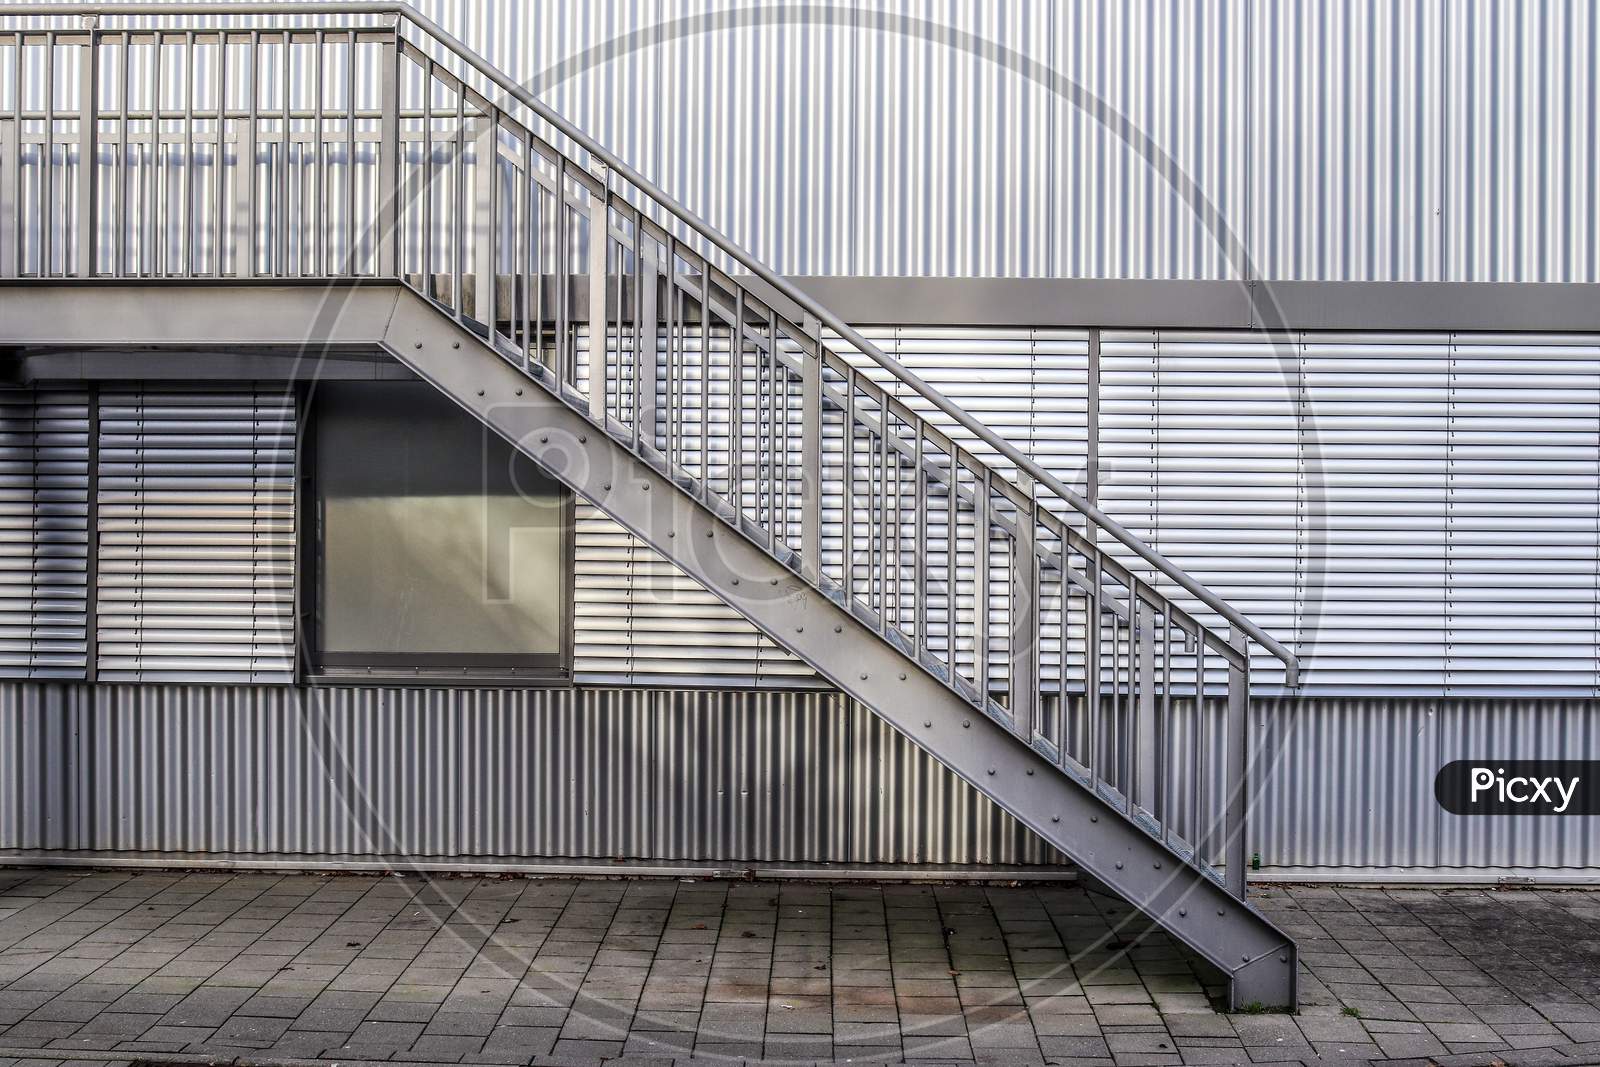 Different outdoor views of concrete, wooden and metal stairways